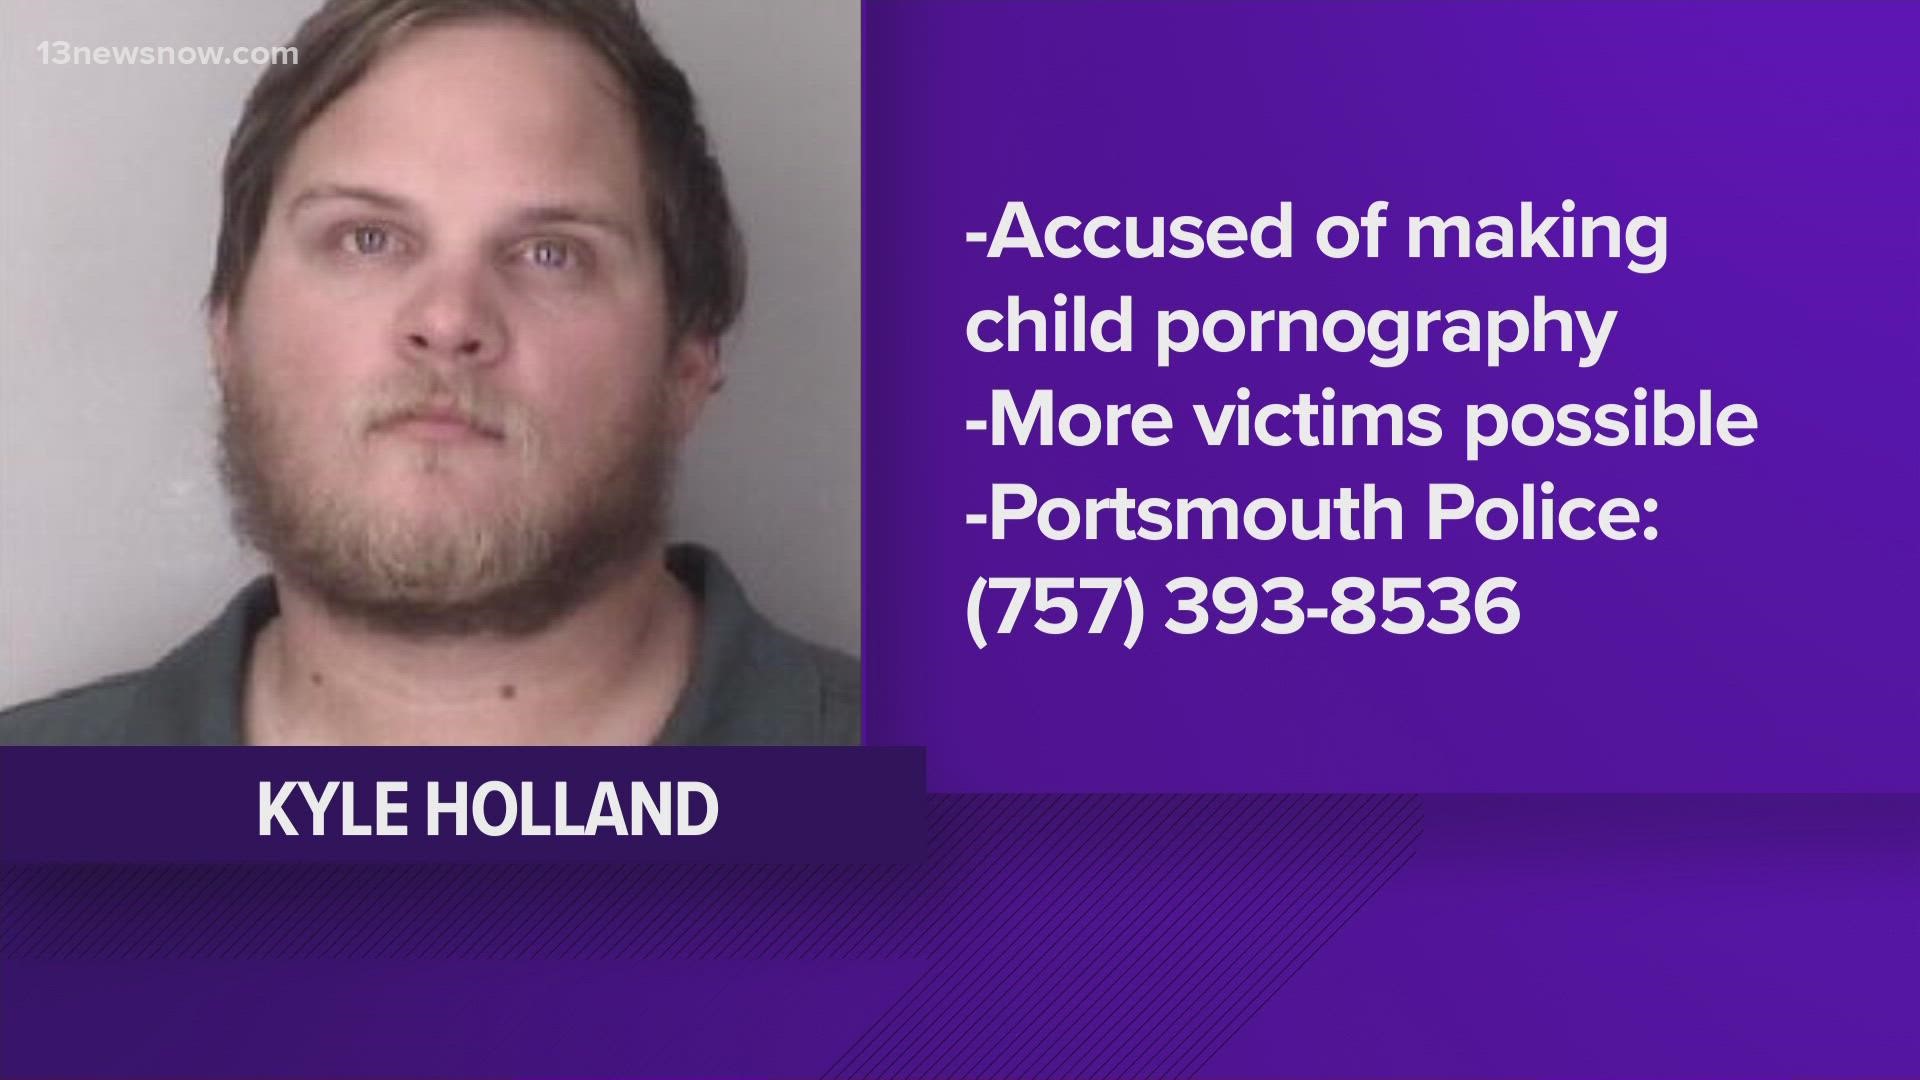 27-year-old Kyle Holland was extradited from Mississippi on Aug. 1, 2022, for allegedly producing child pornography.